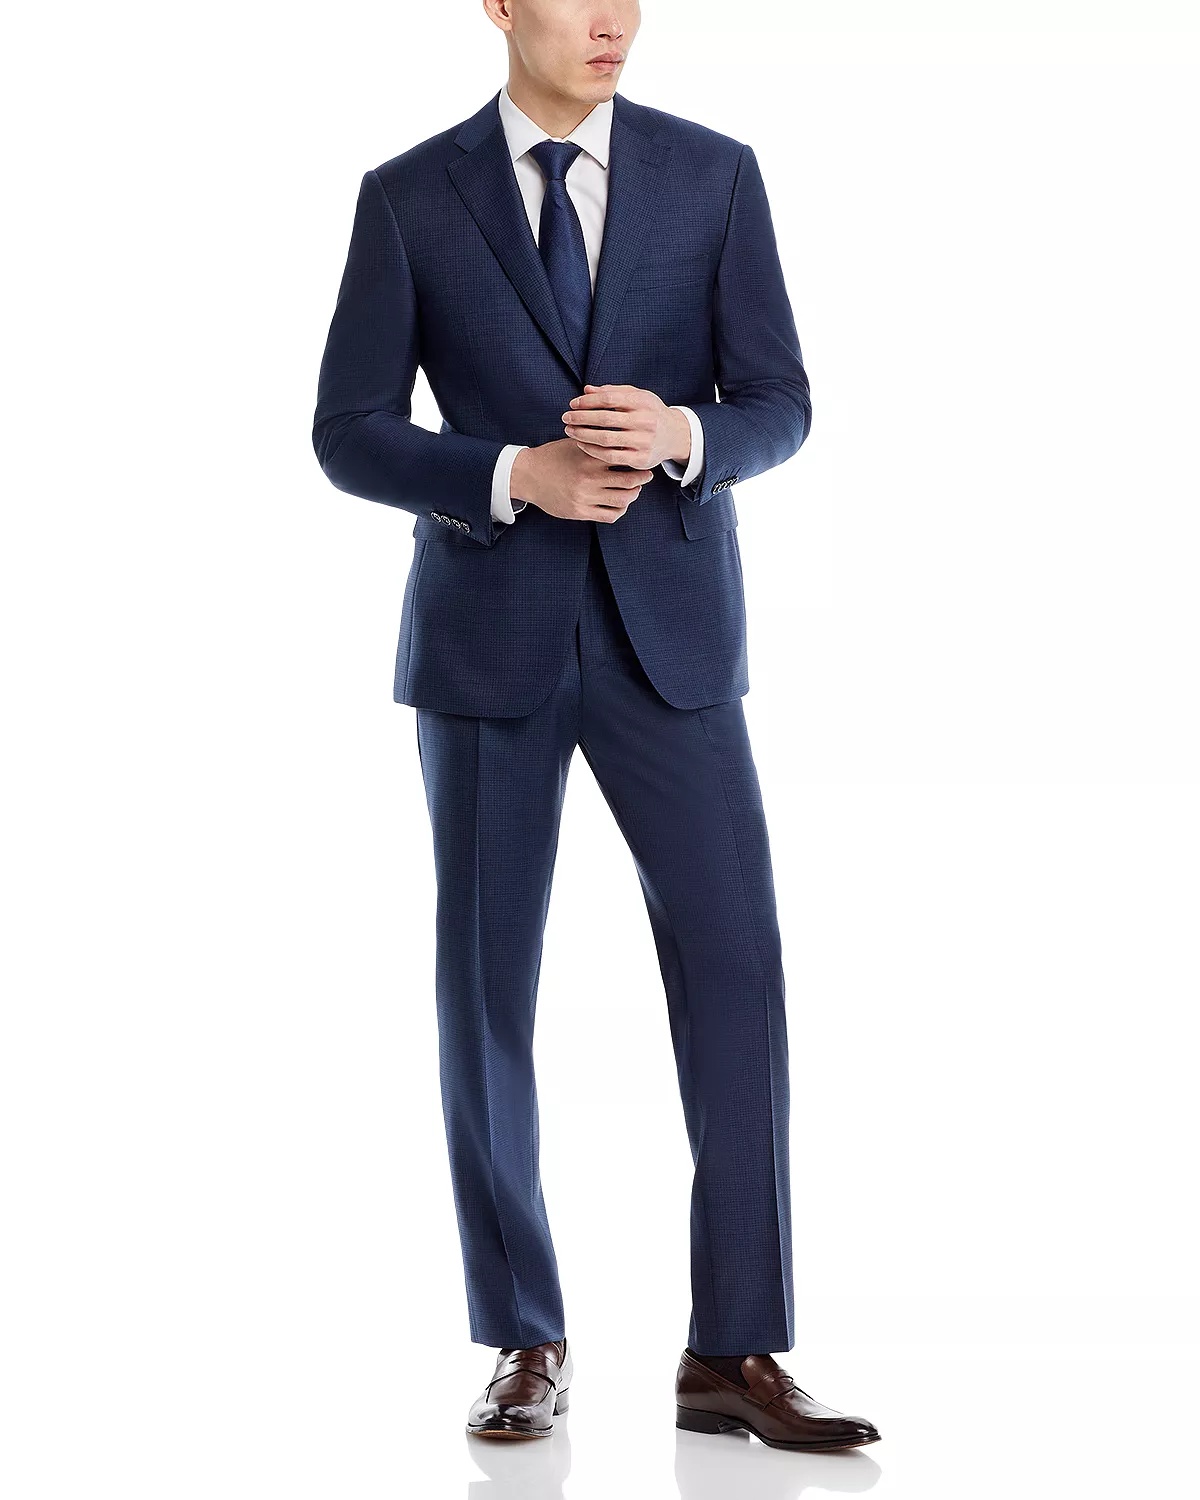 Siena Sharkskin Micro Check Classic Fit Suit - 1